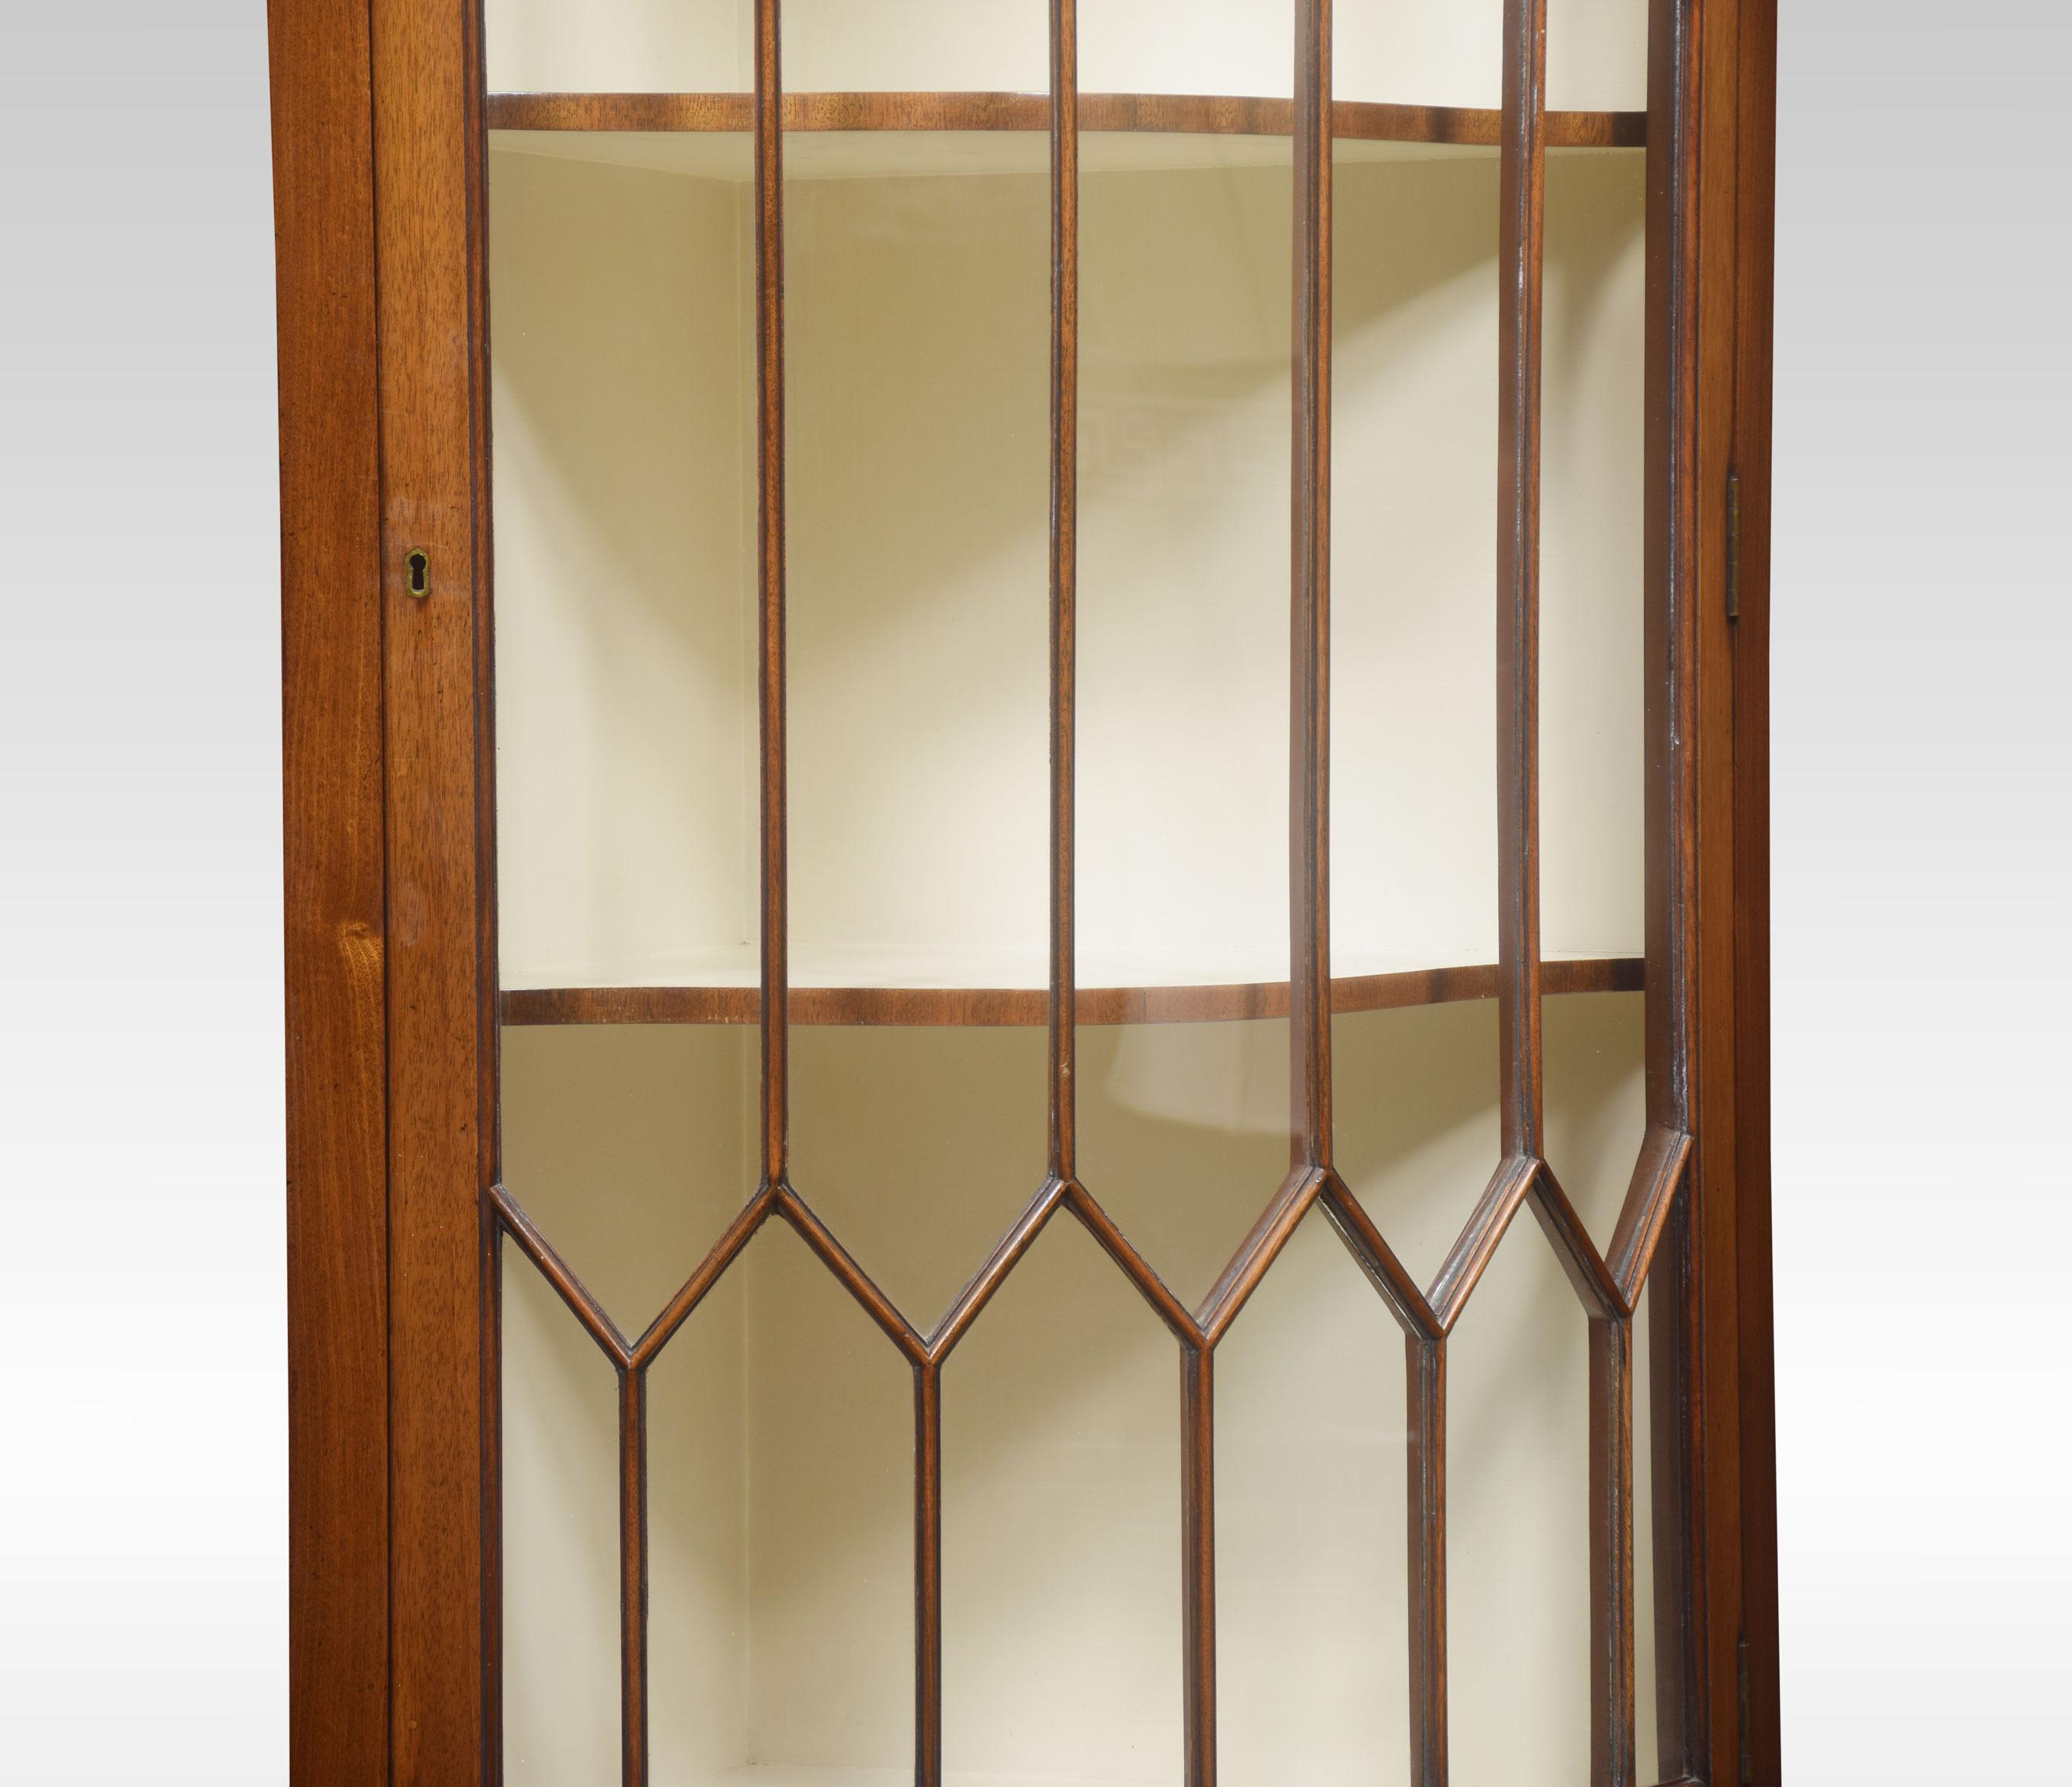 A Pair of mahogany standing corner cupboards, the bow-fronted astragal glazed doors opening to reveal to fixed shelves above a bow fronded flame mahogany panelled door, raised up on shaped bracket feet.
Dimensions
Height 75 inches
Width 26